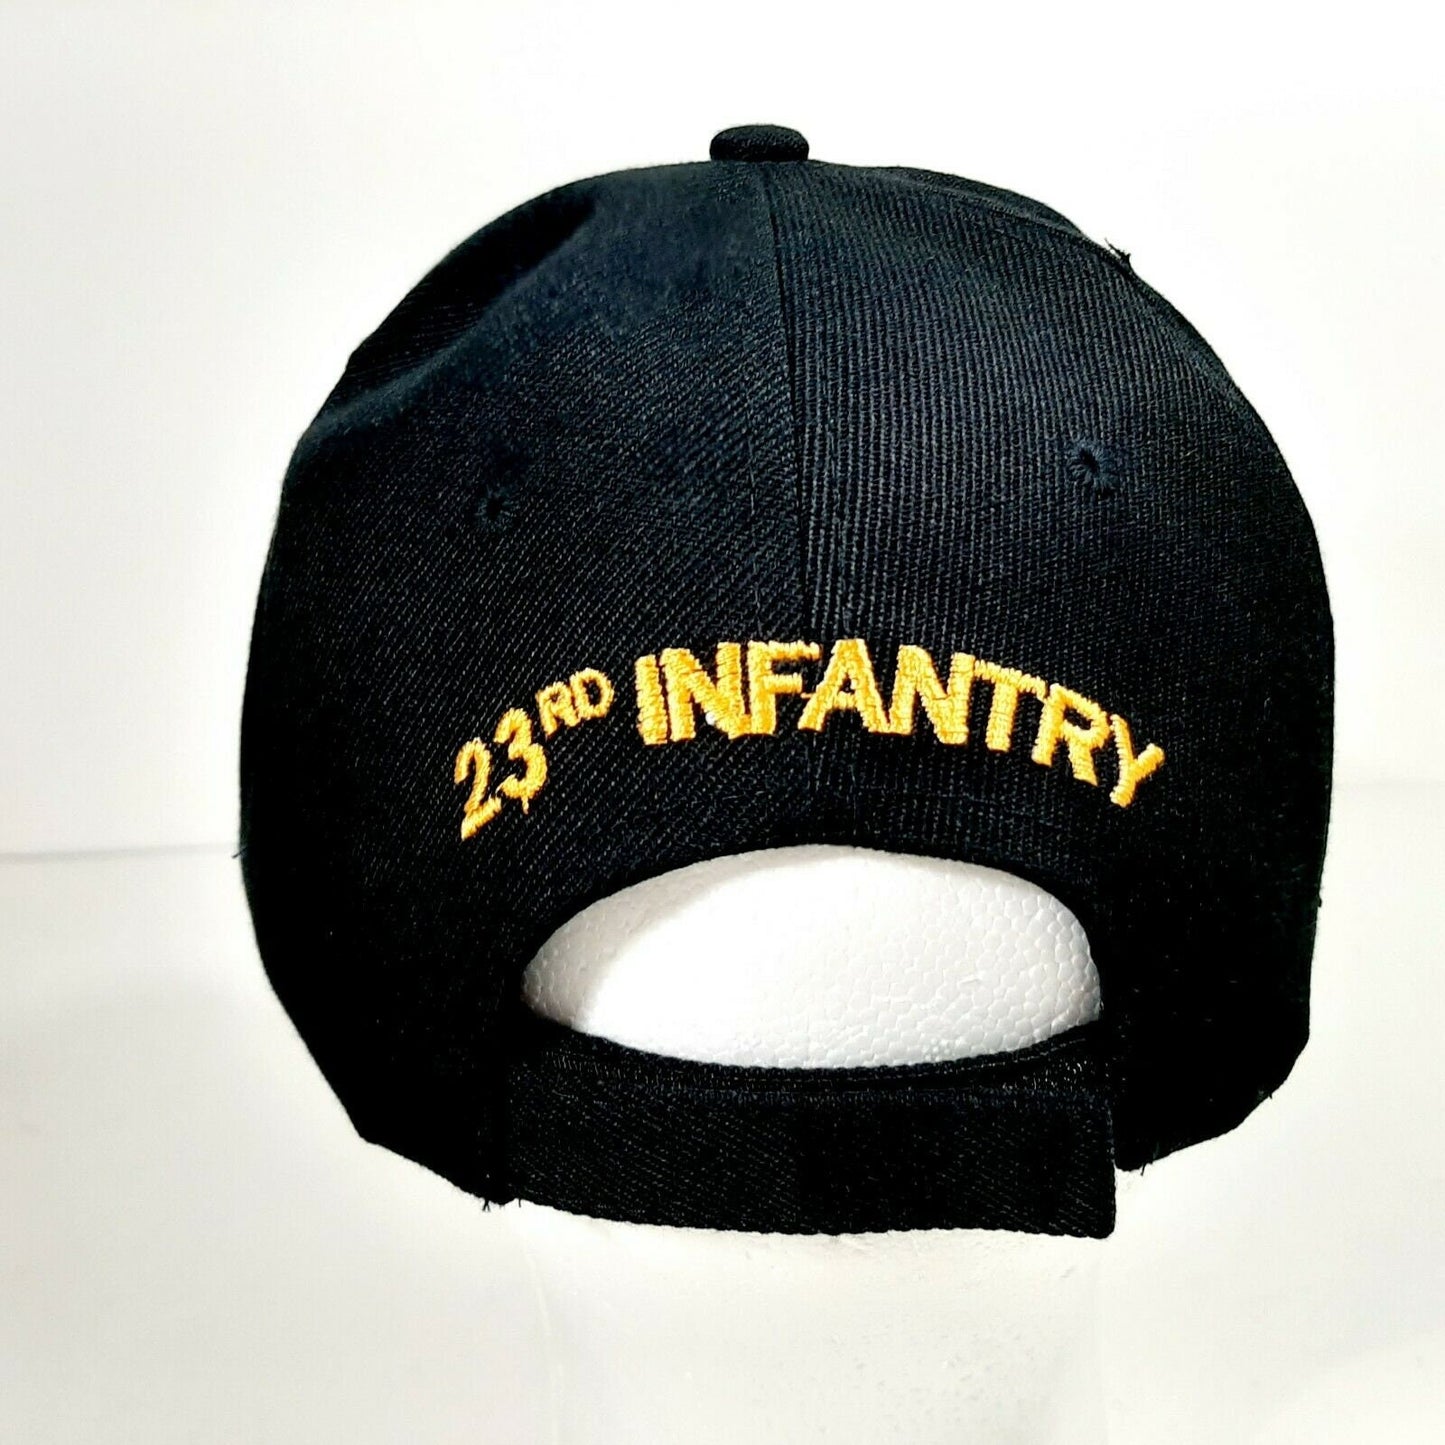 US Army 23rd Infantry Division Men's Cap Hat Black Embroidered Acrylic